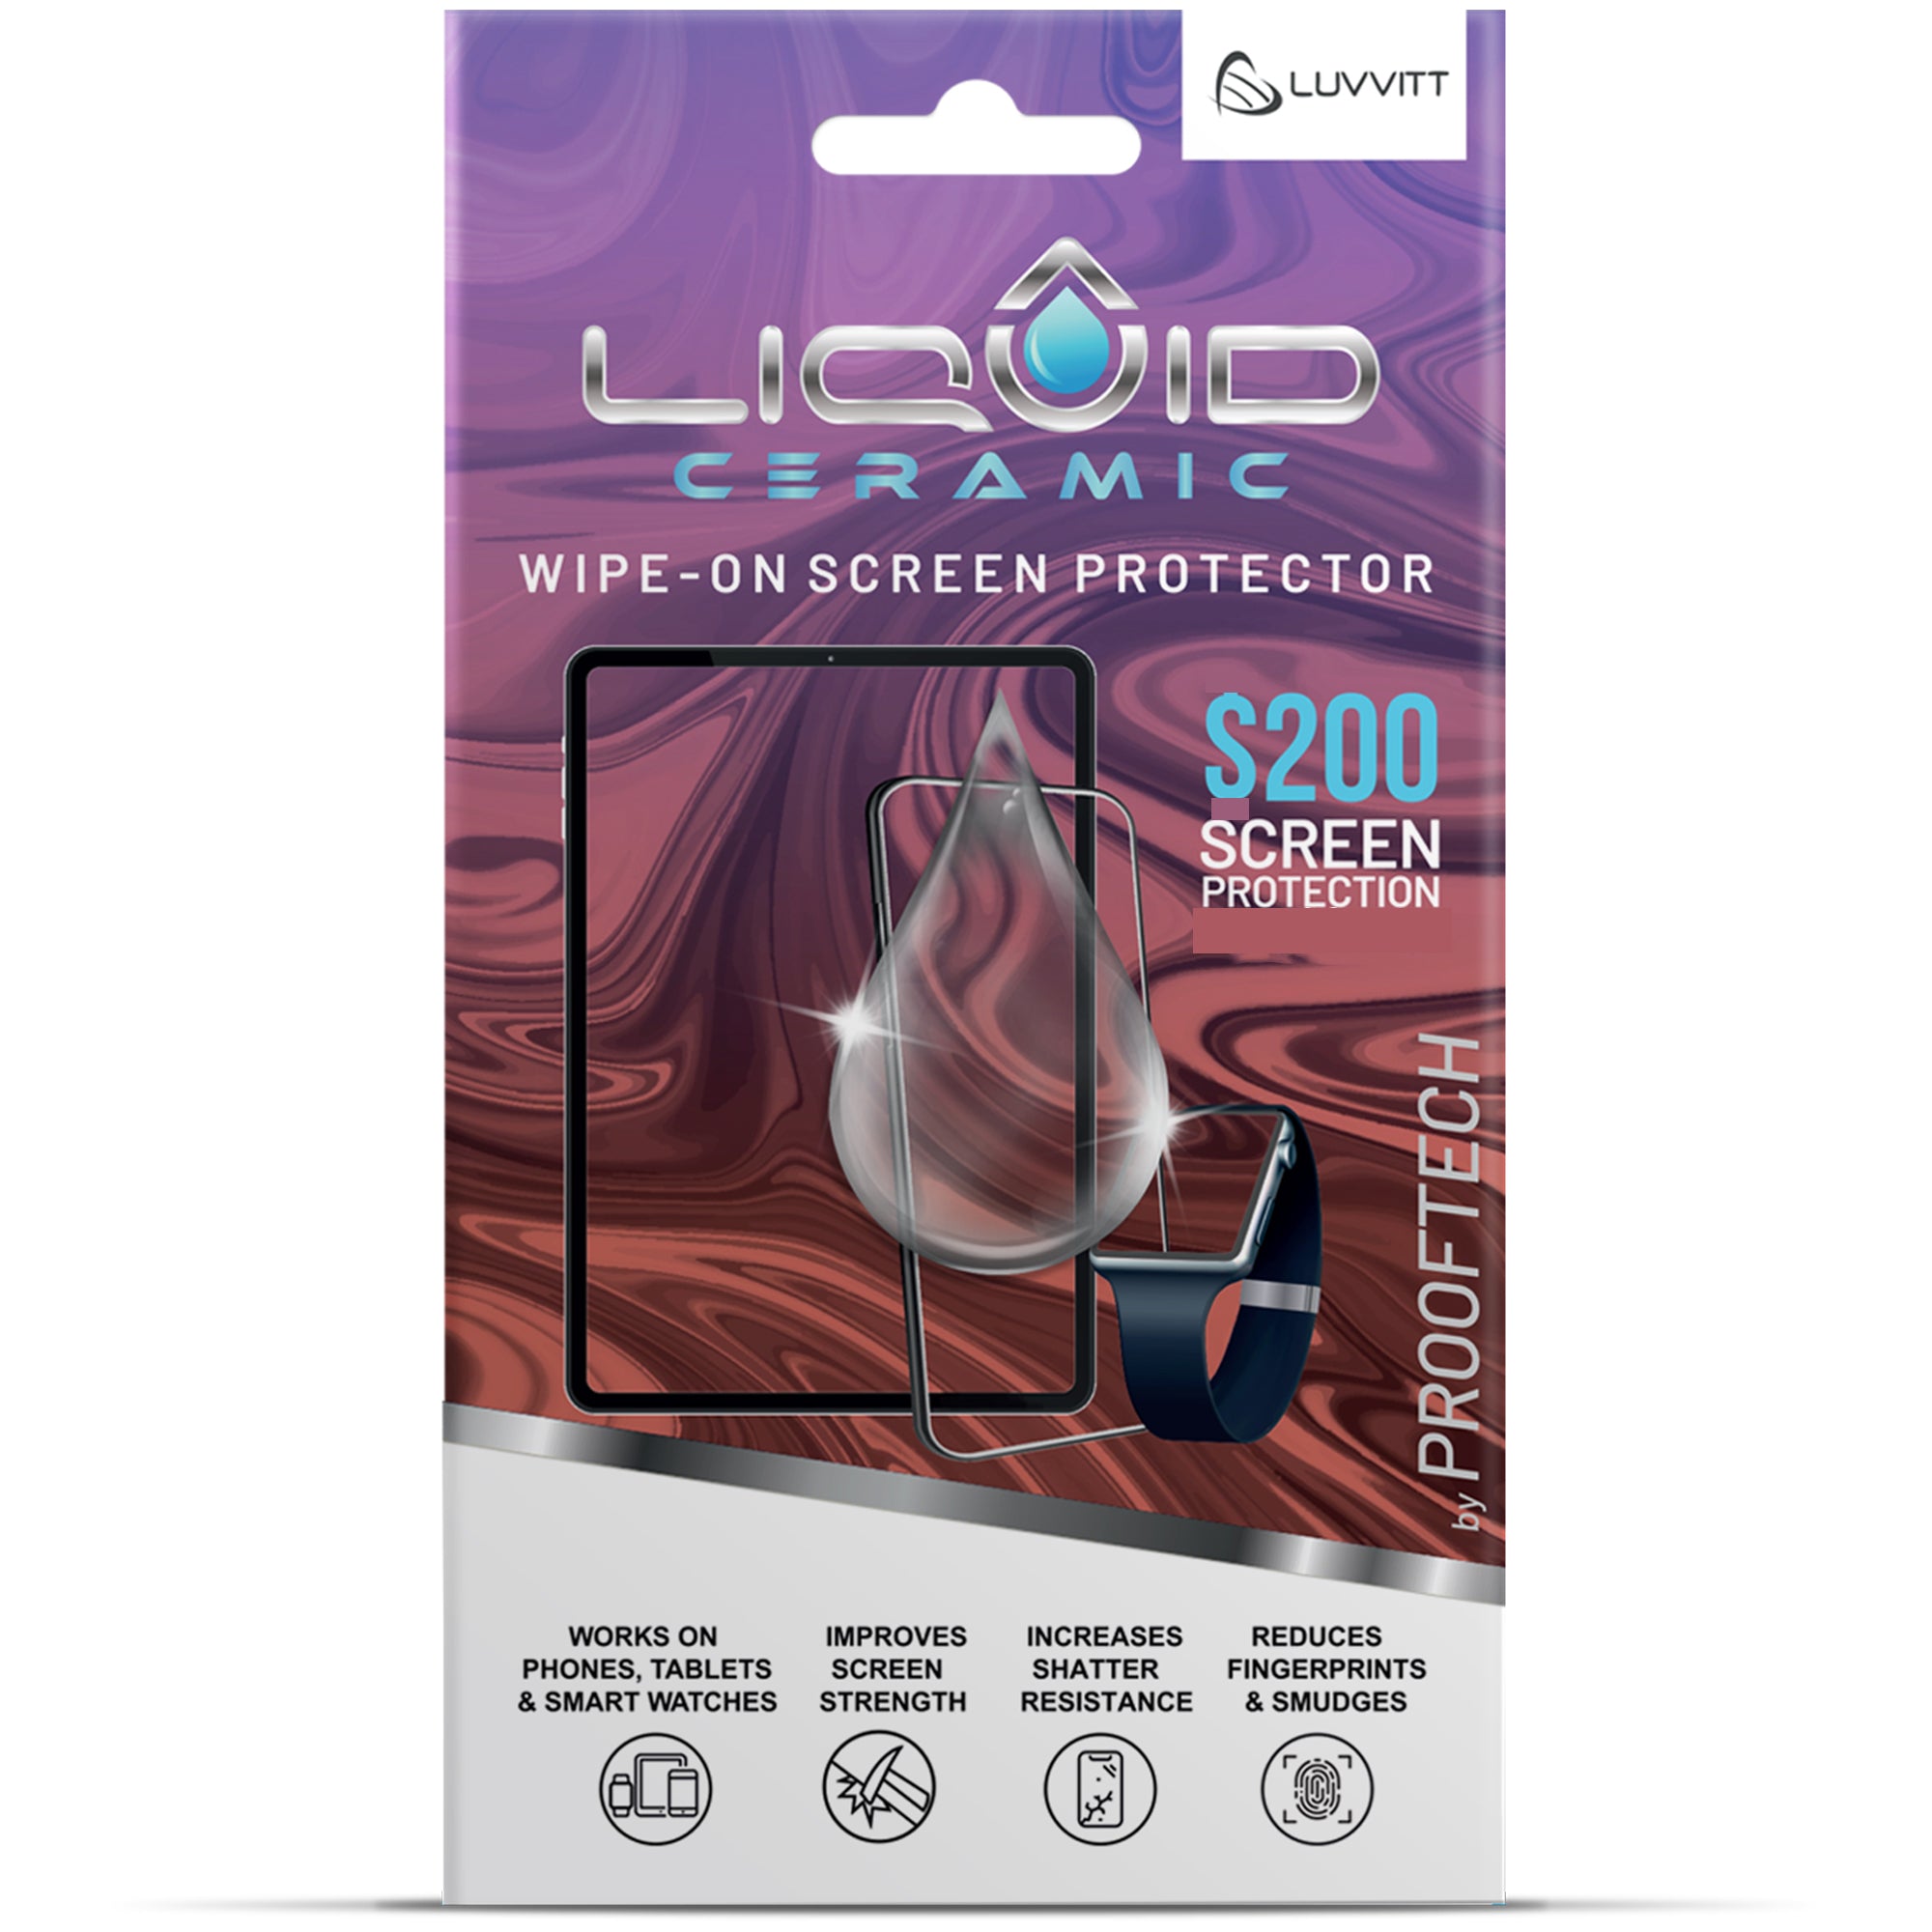 Liquid Ceramic Screen Protector with $200 Guarantee for All Phones Tablets and Smart Watches